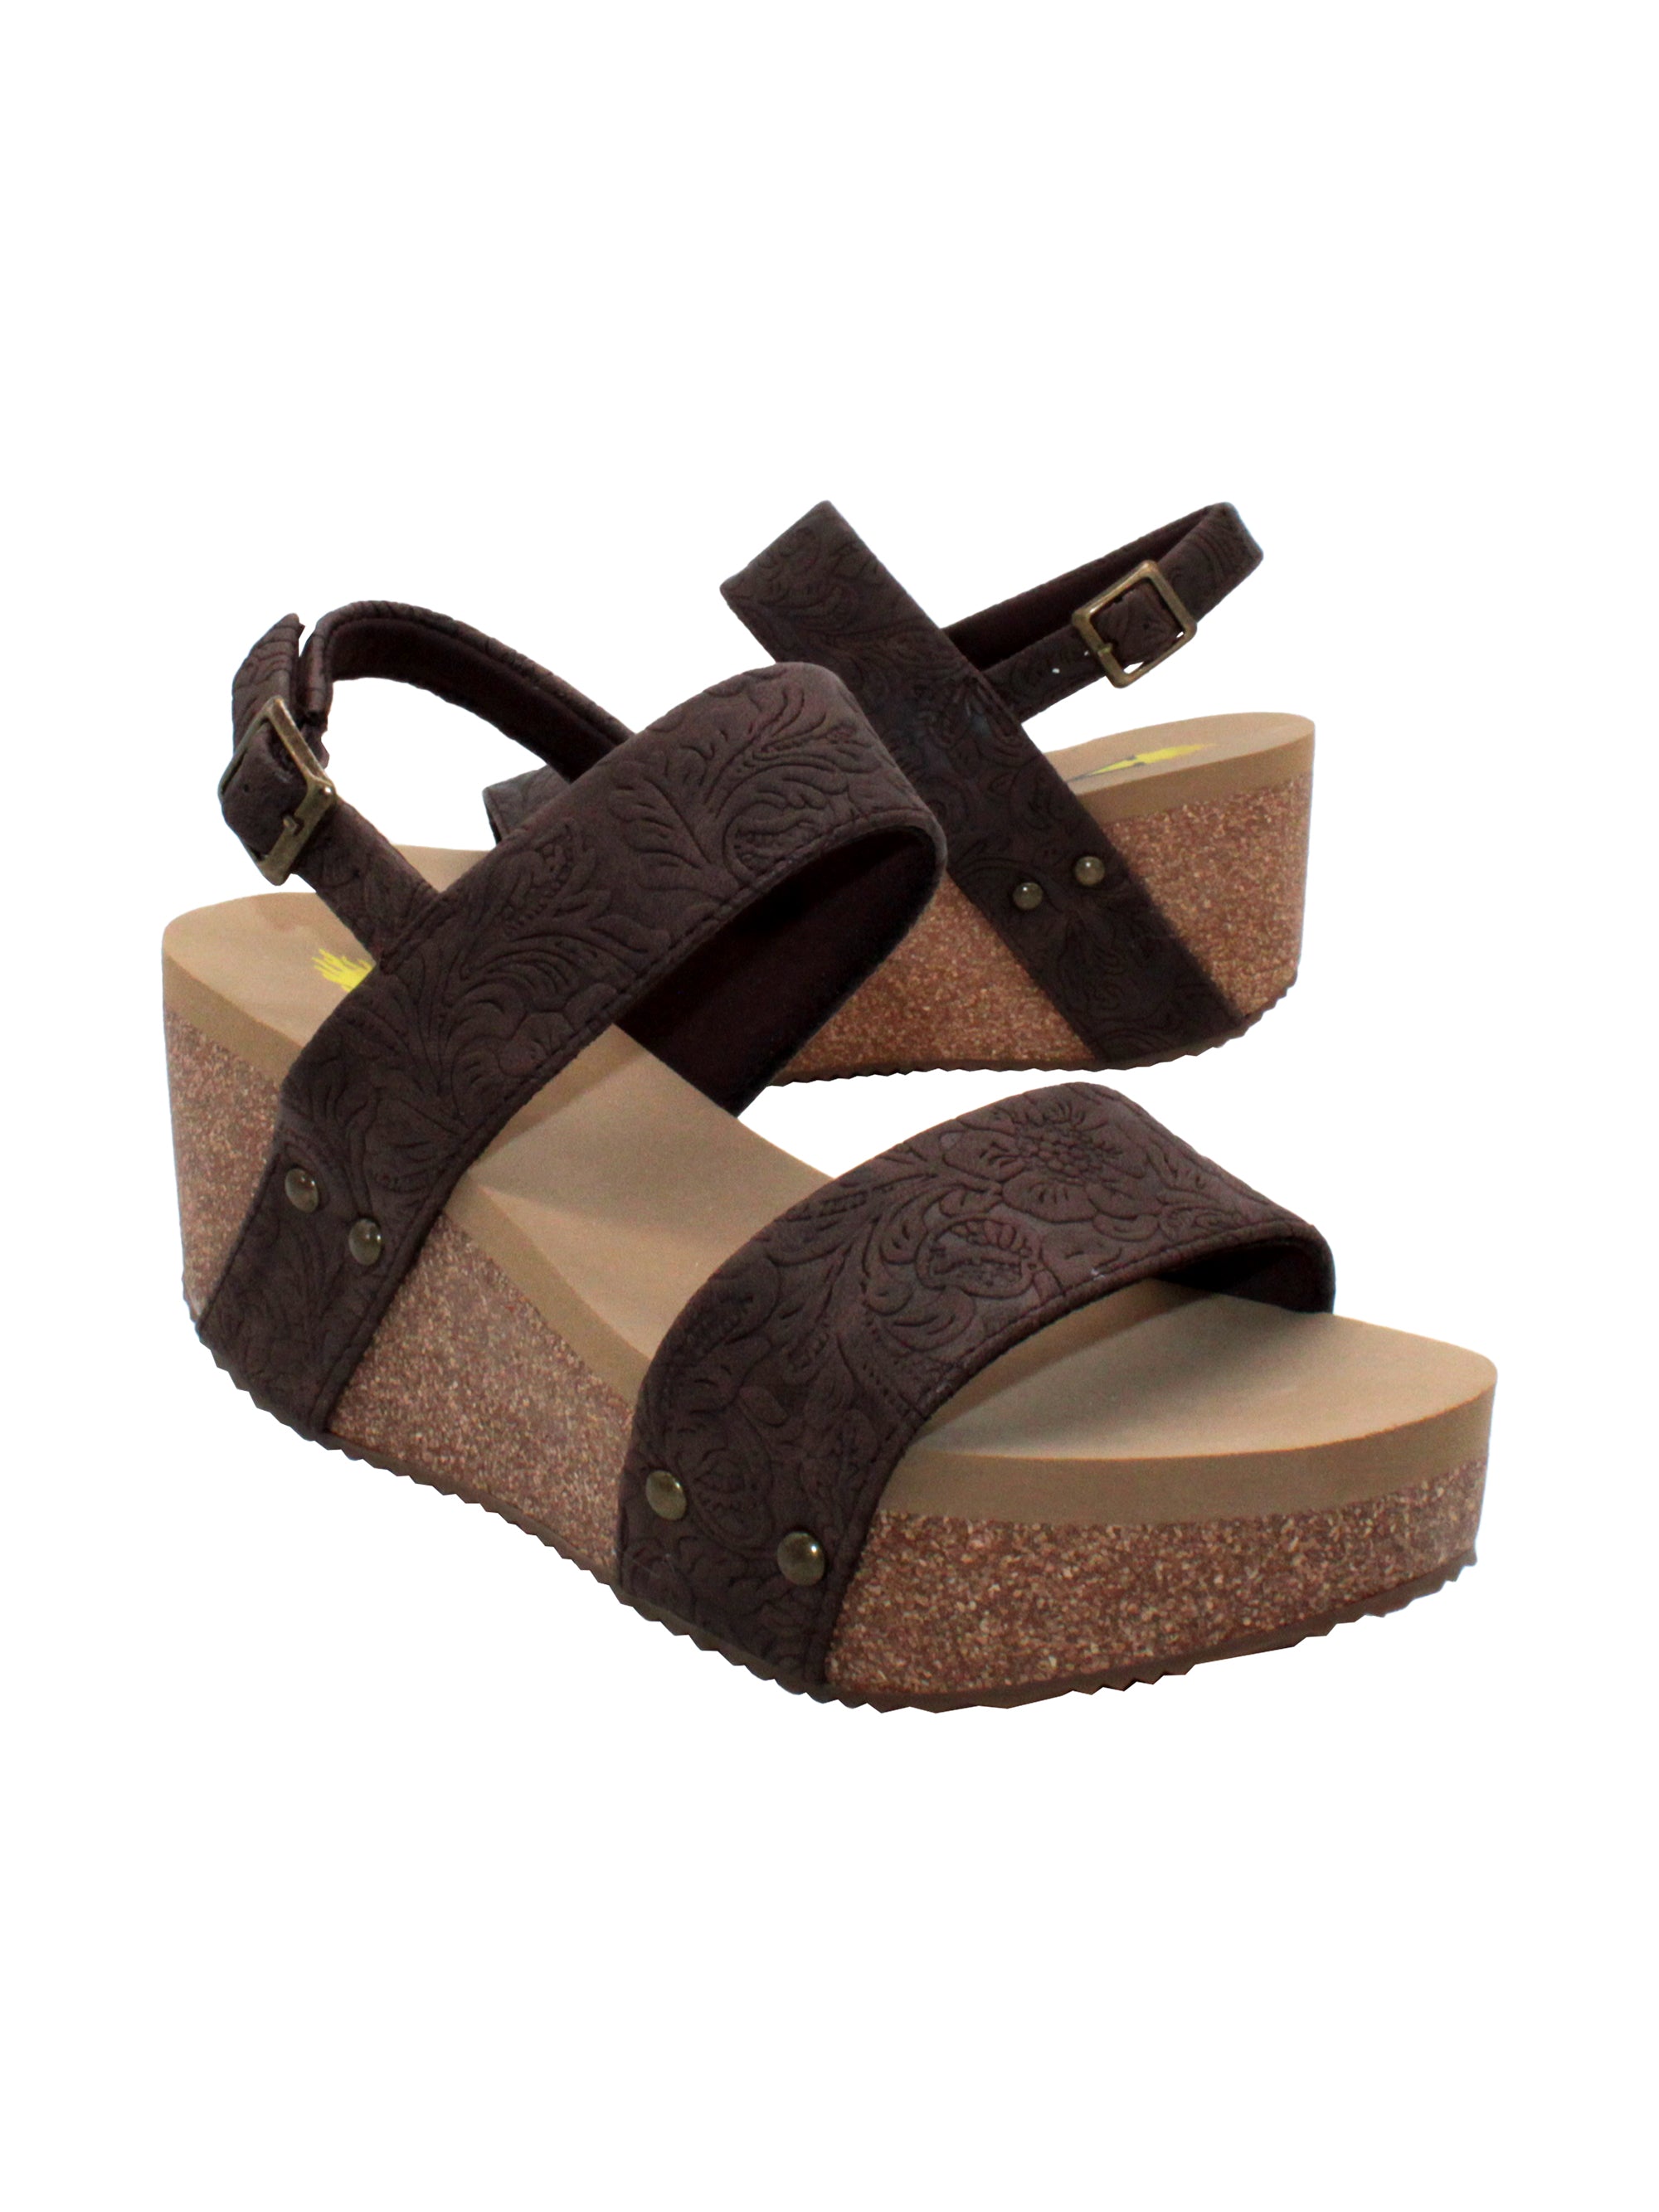 Casual Wear Black Wedges heels With White Lining sandals for ladies at Rs  540/pair in Gurugram